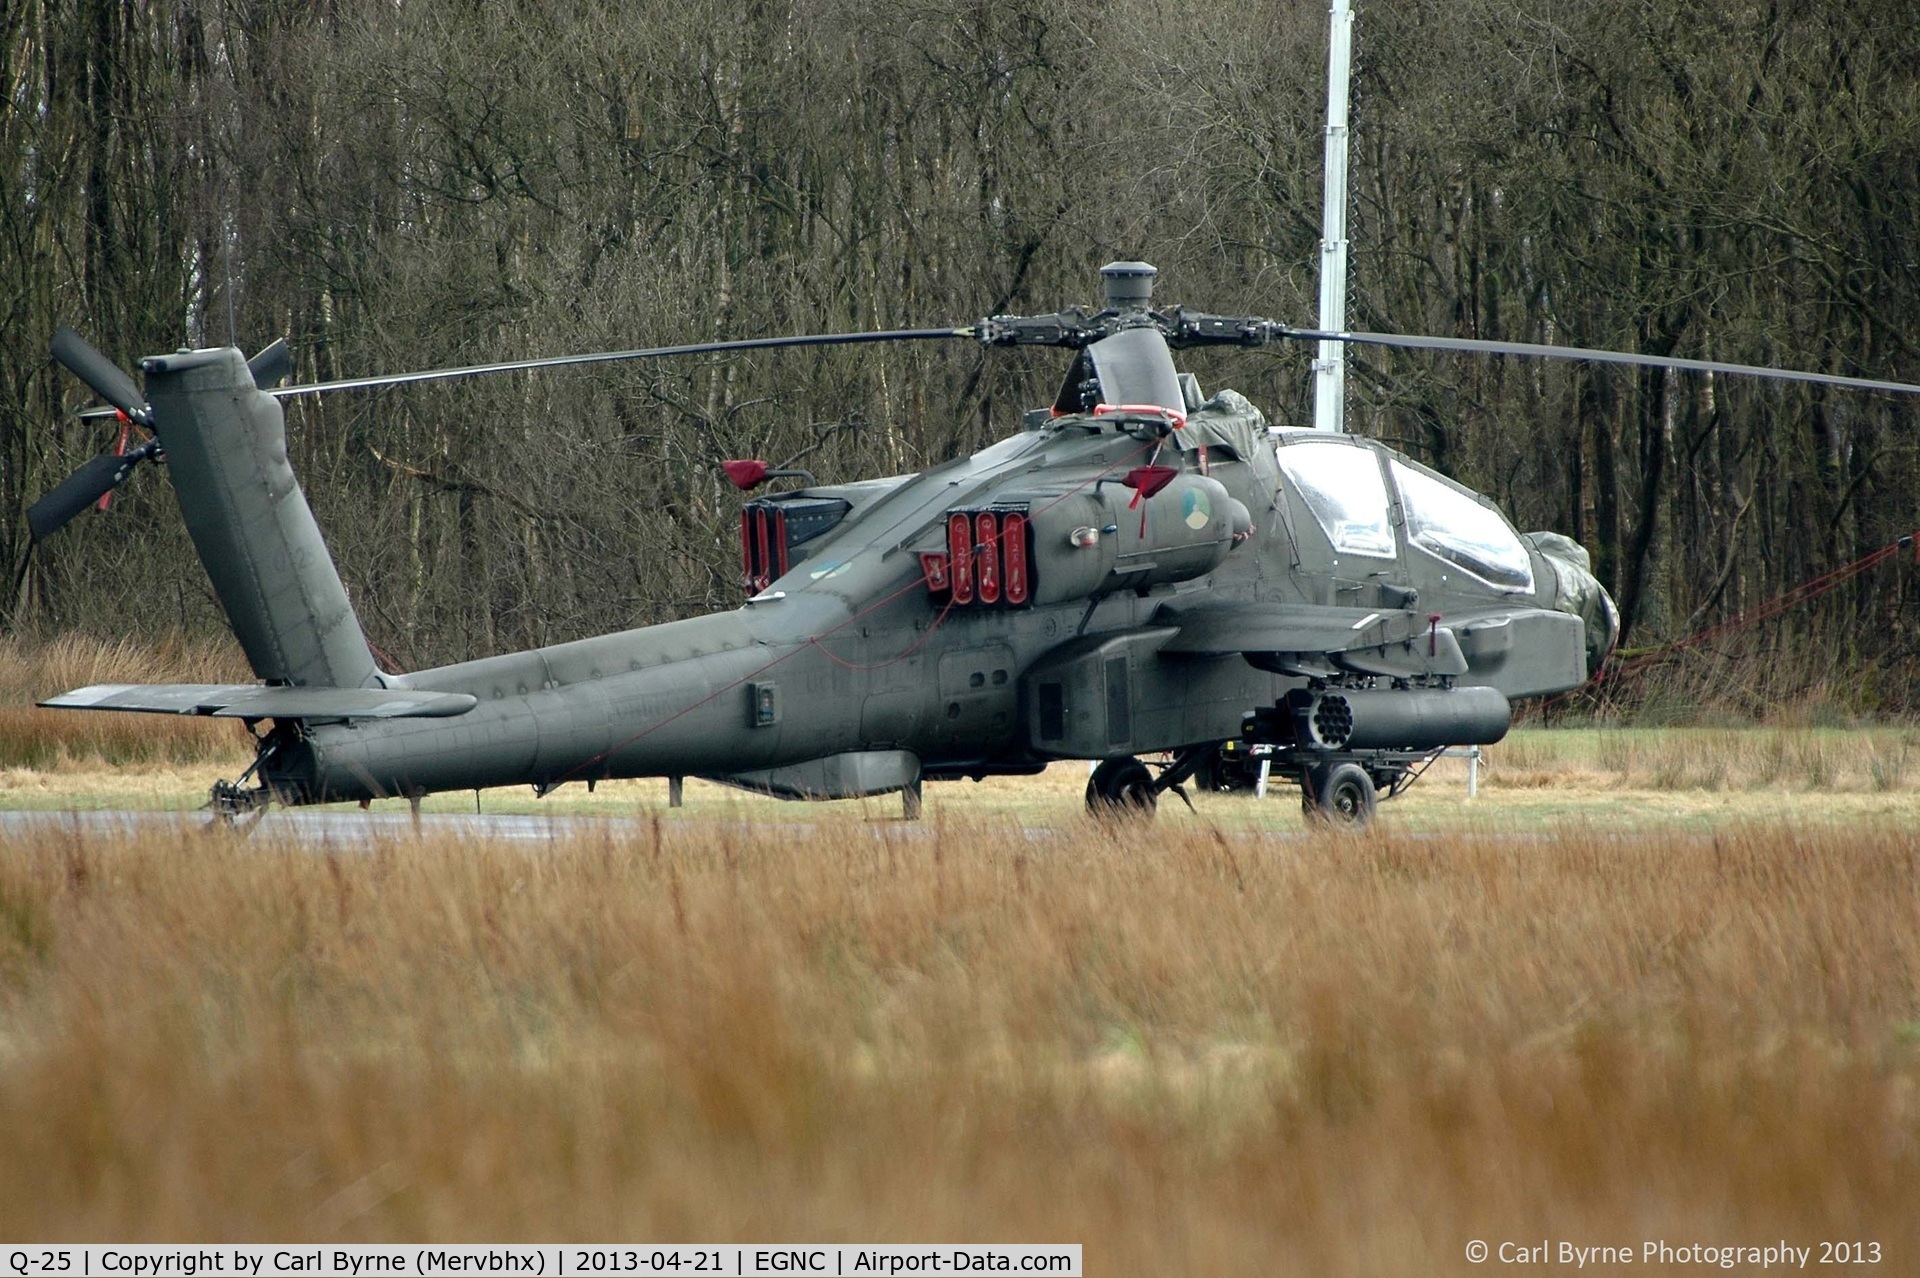 Q-25, 1998 Boeing AH-64D Longbow Apache C/N DN025, Here for the annual exercise.